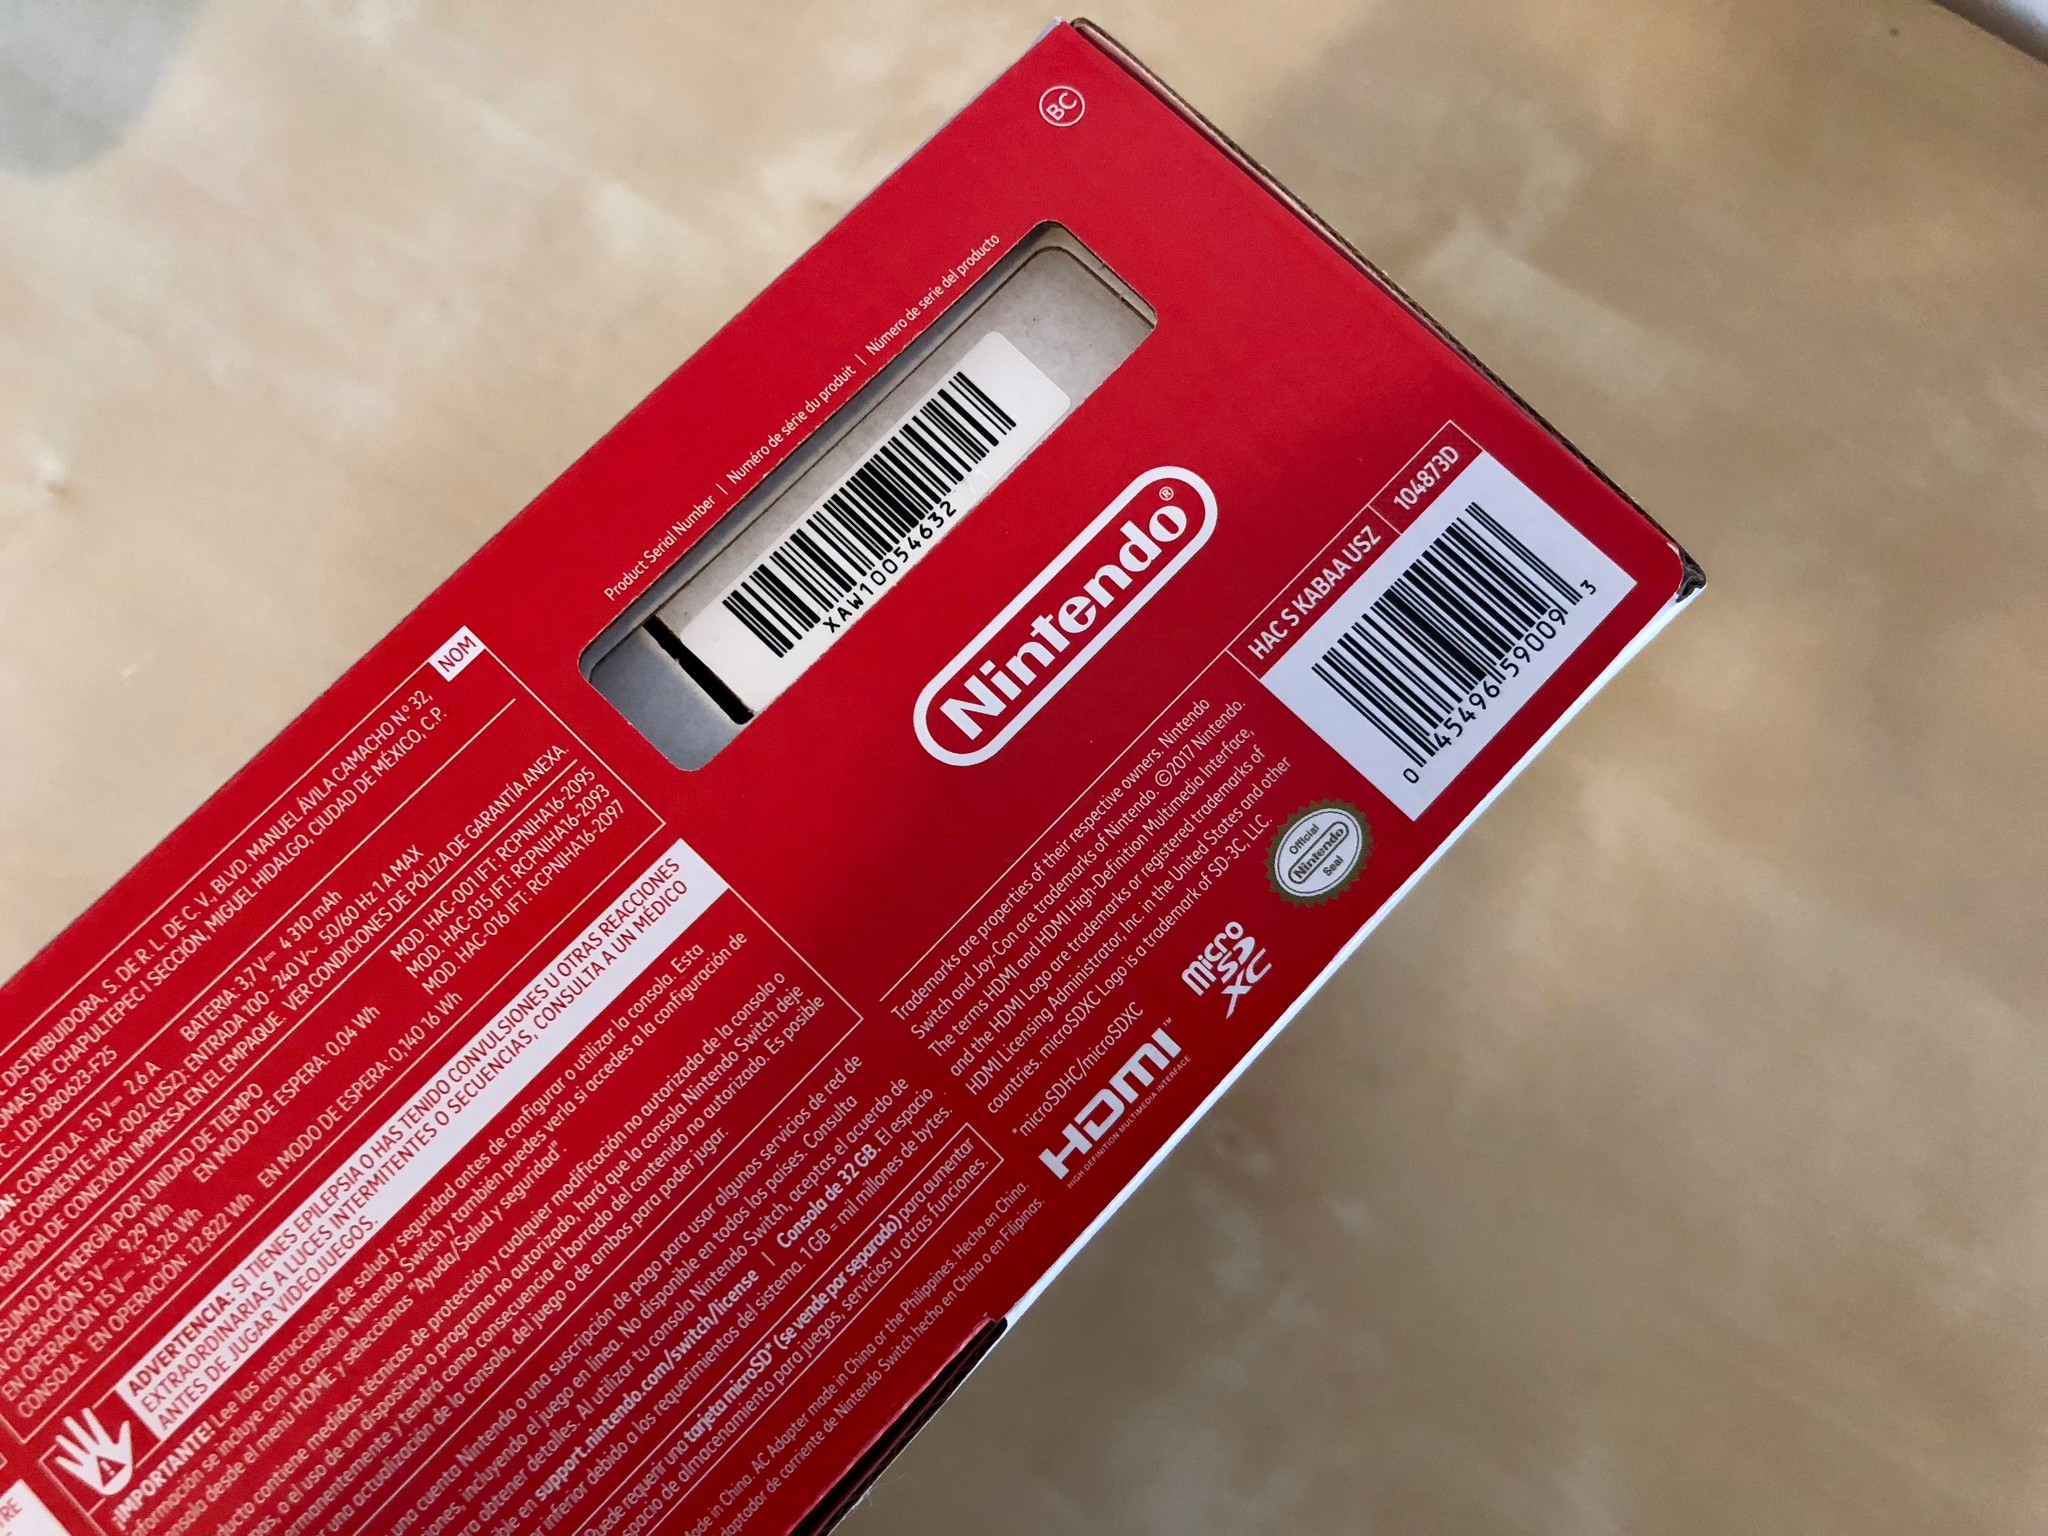 Serial number on Switch